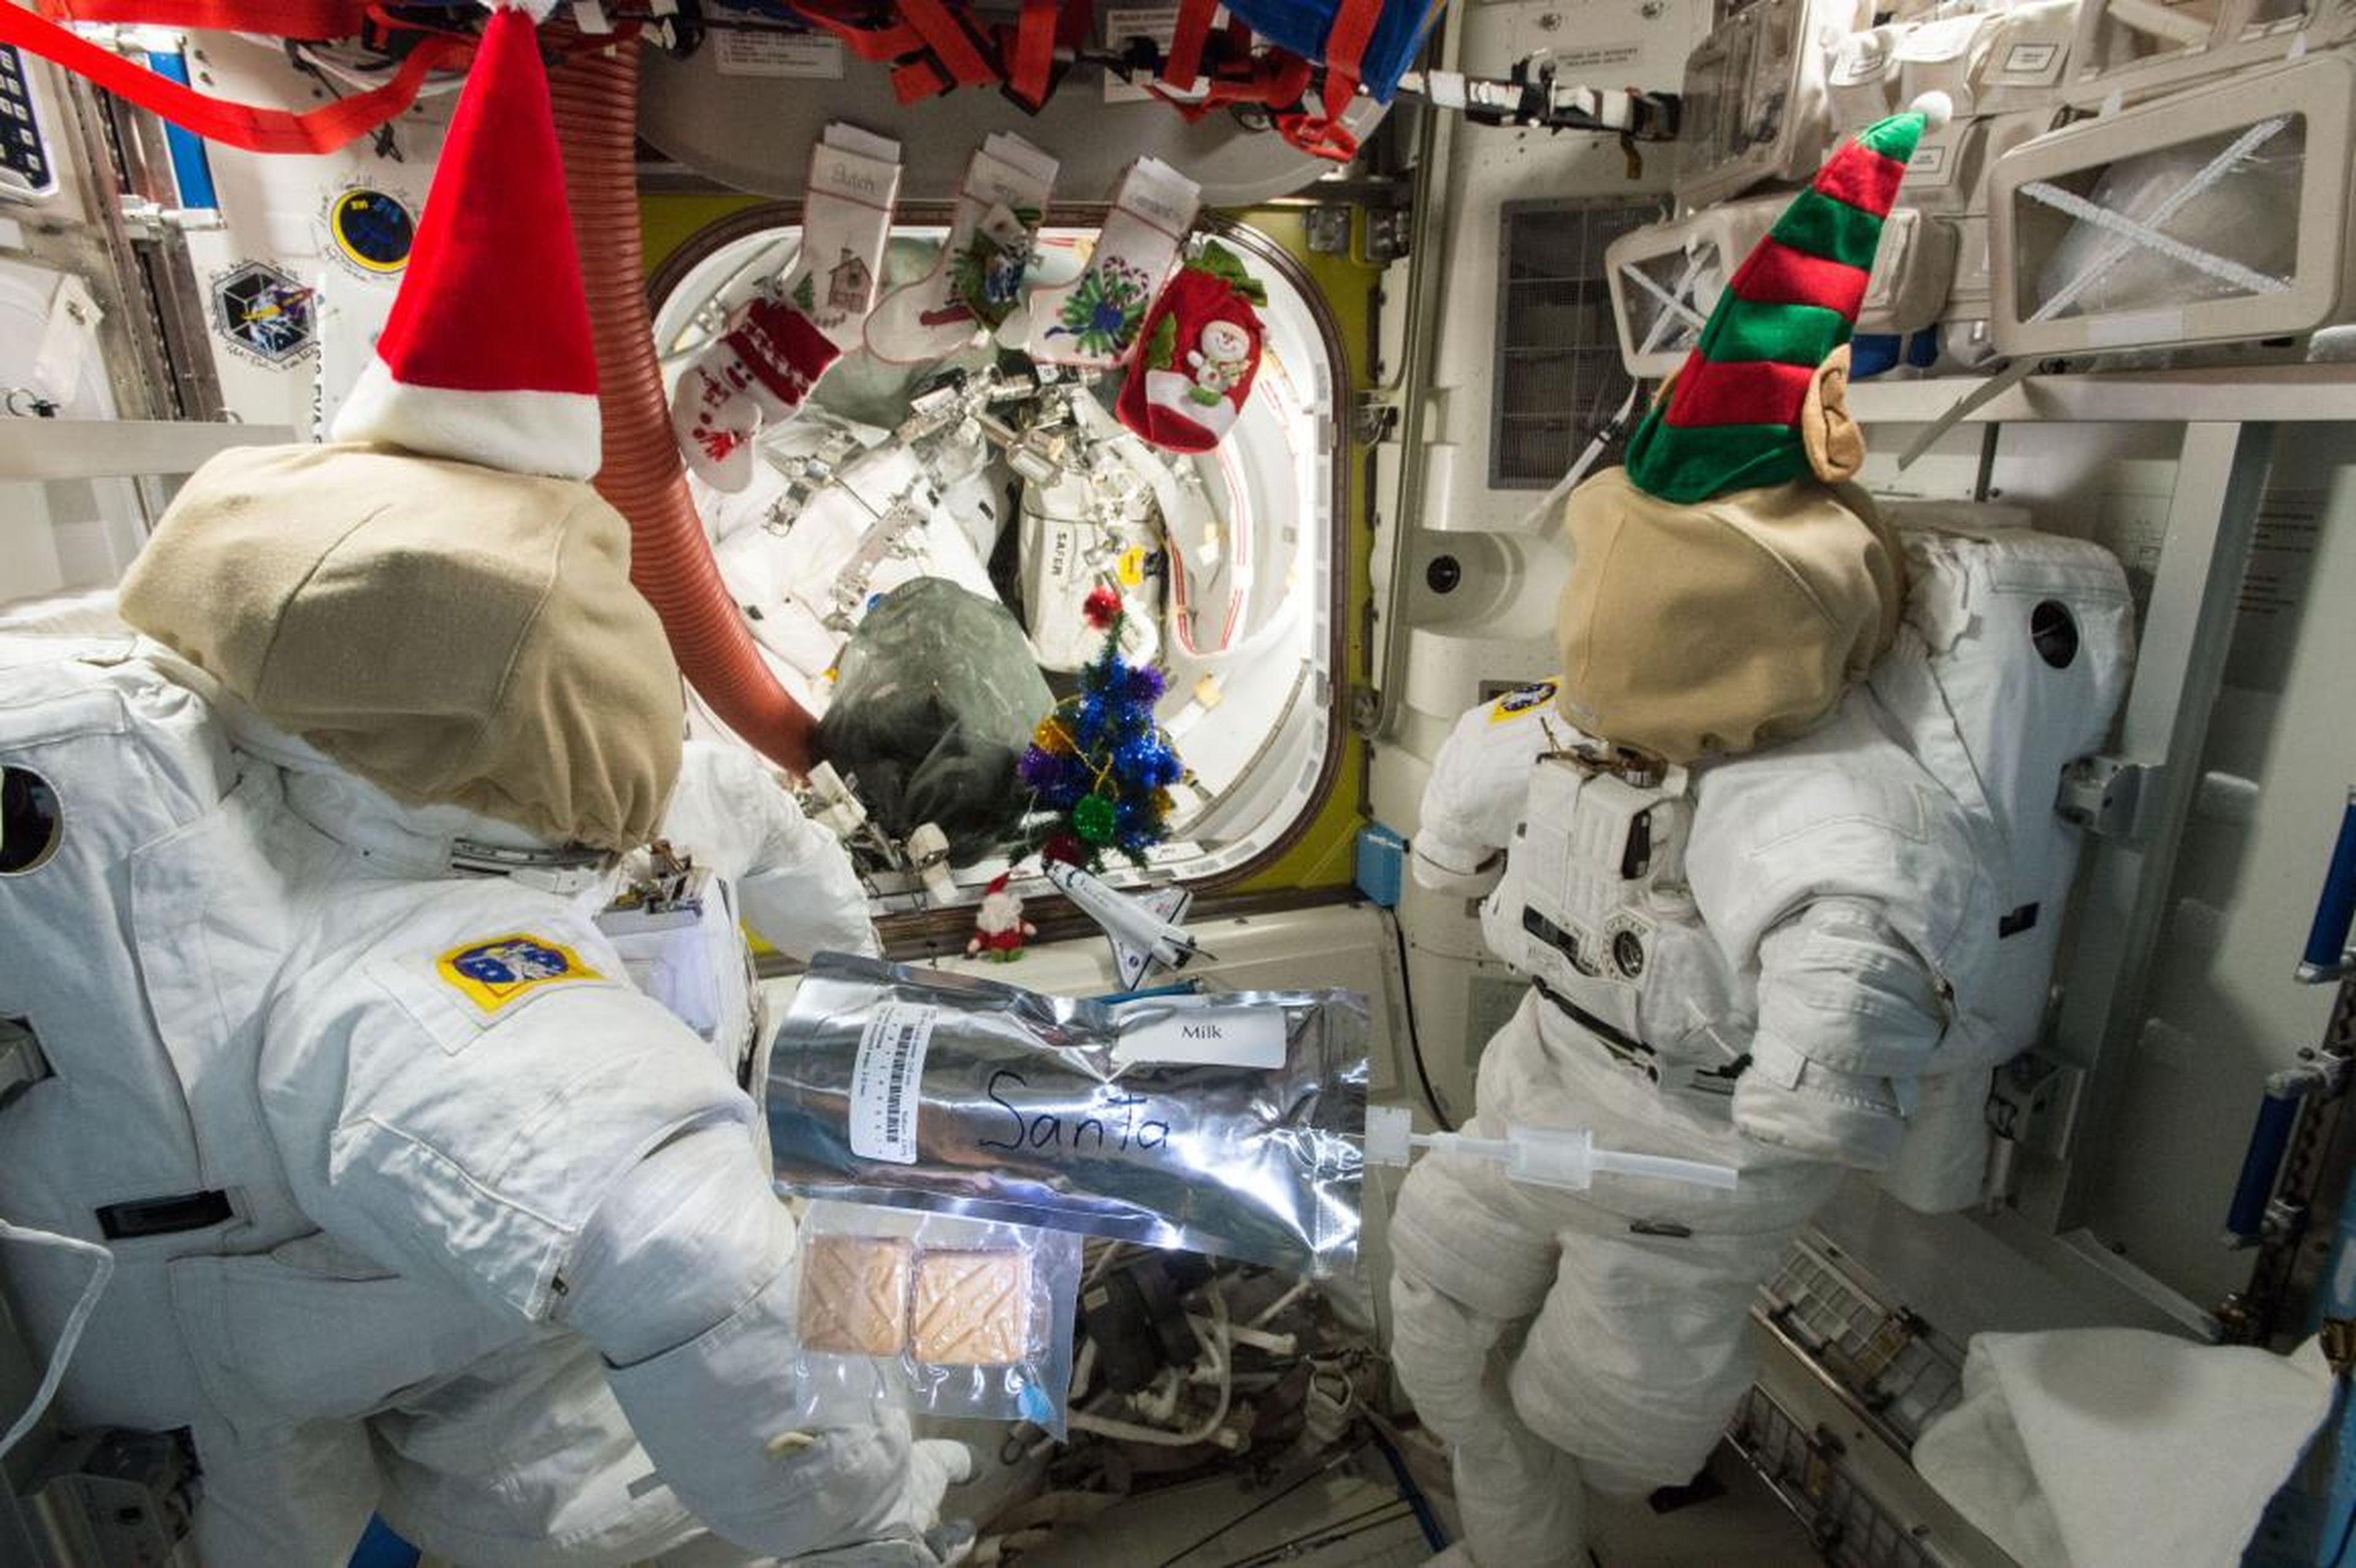 Stuffing empty space suits and putting hats on them appears to have caught on, in 2014 US astronaut astronaut Terry Virts shared this picture.